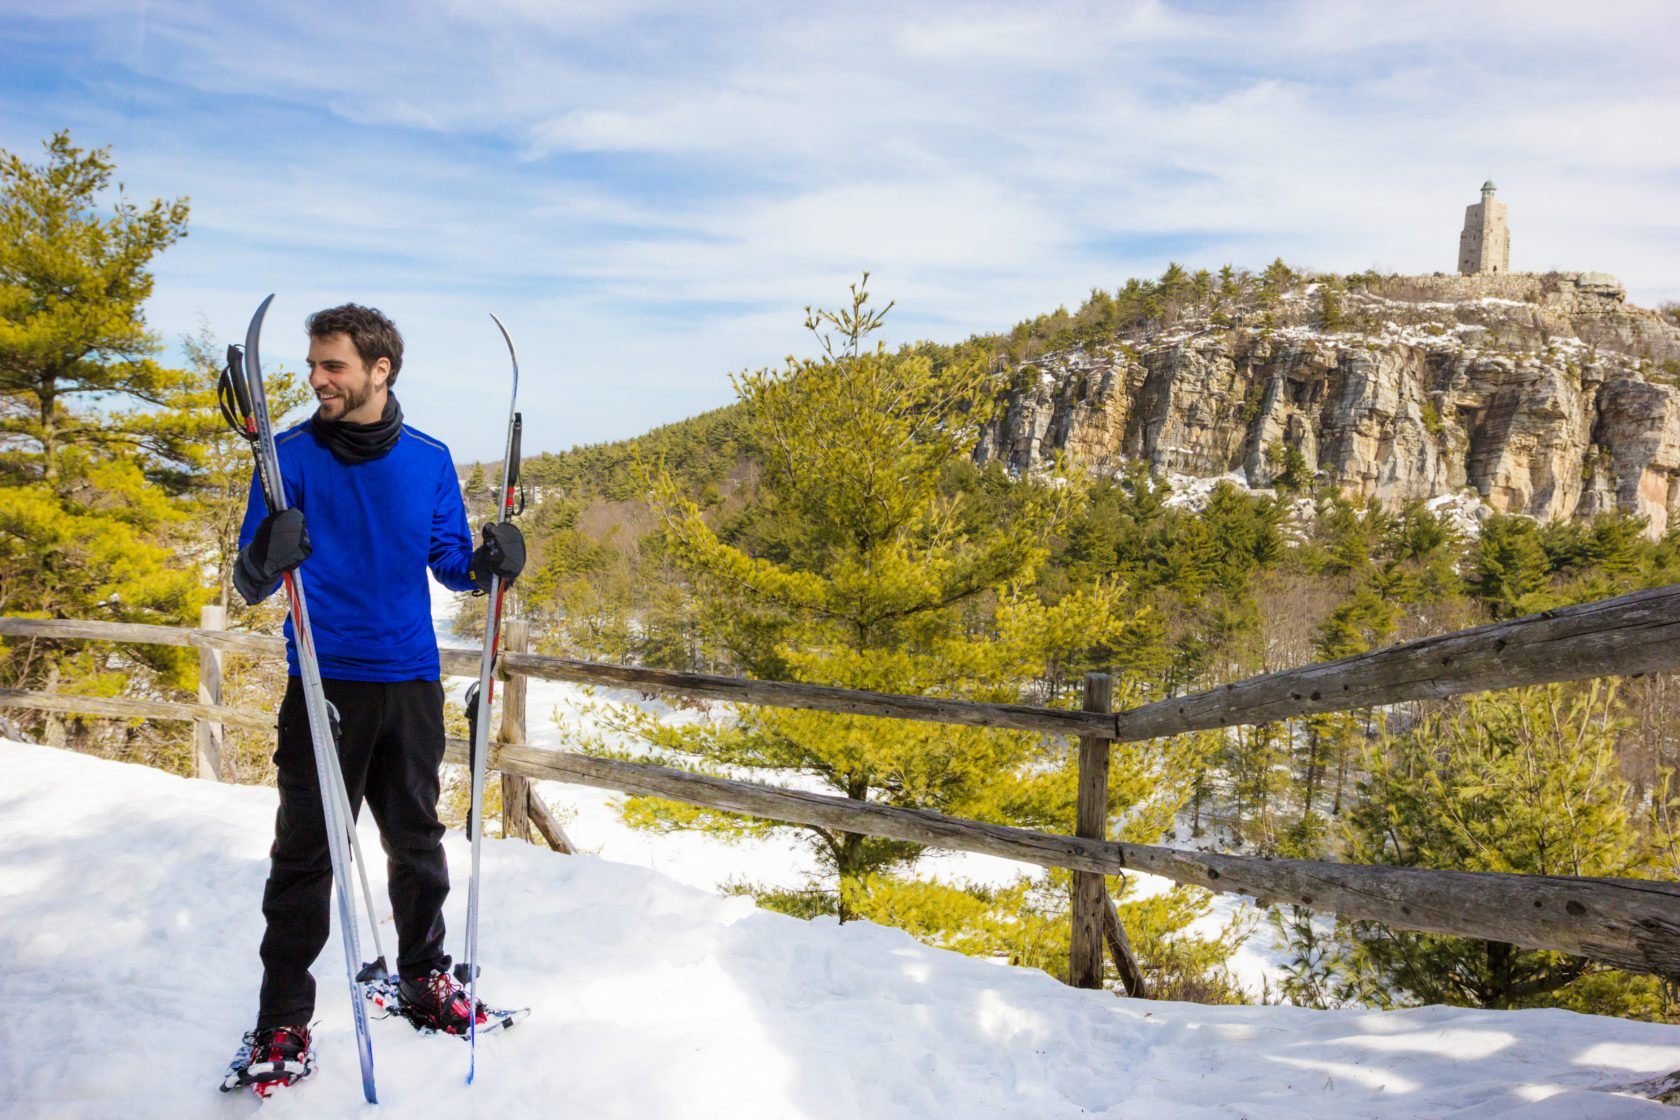 Winter Sports at Mohonk